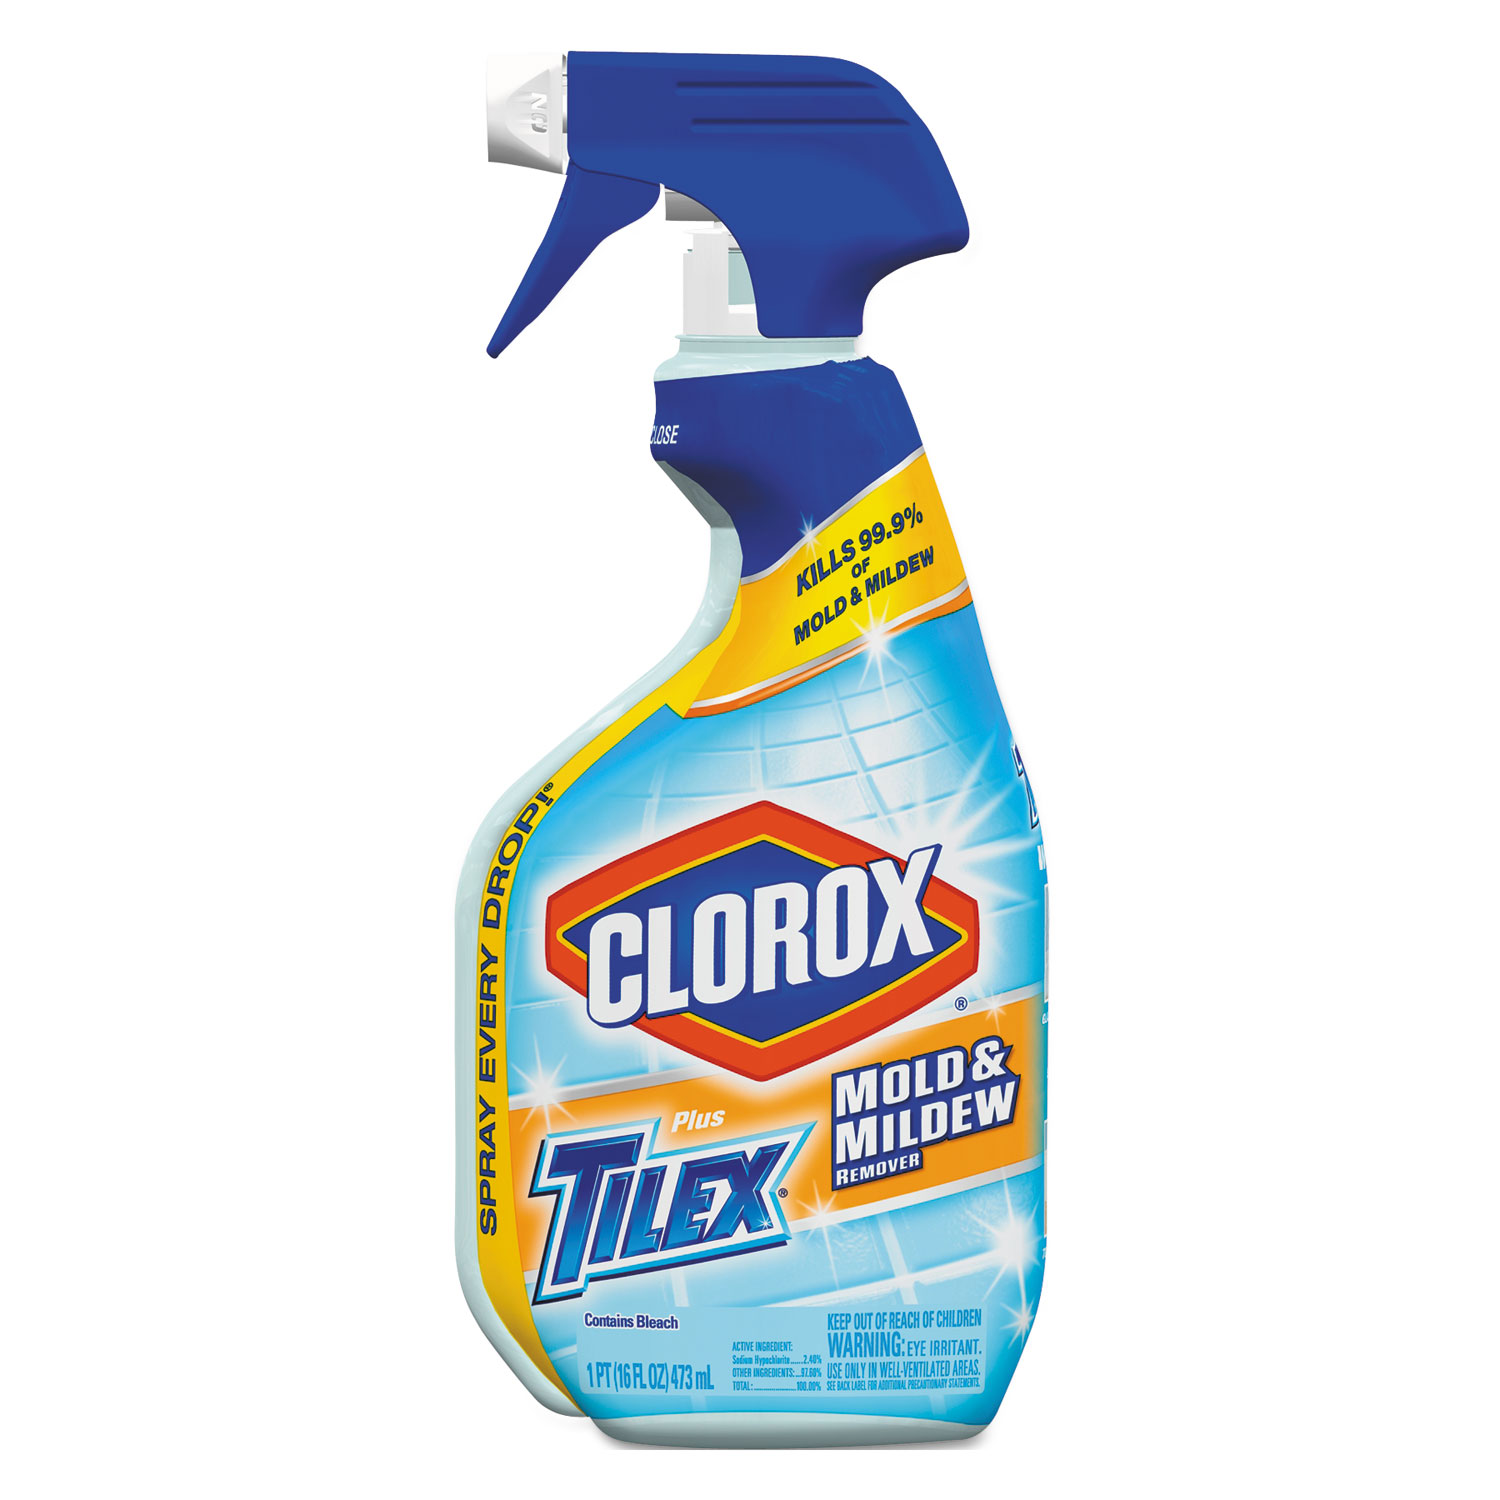 Clorox Plus Tilex Mold and Mildew Remover Spray with Bleach 16oz